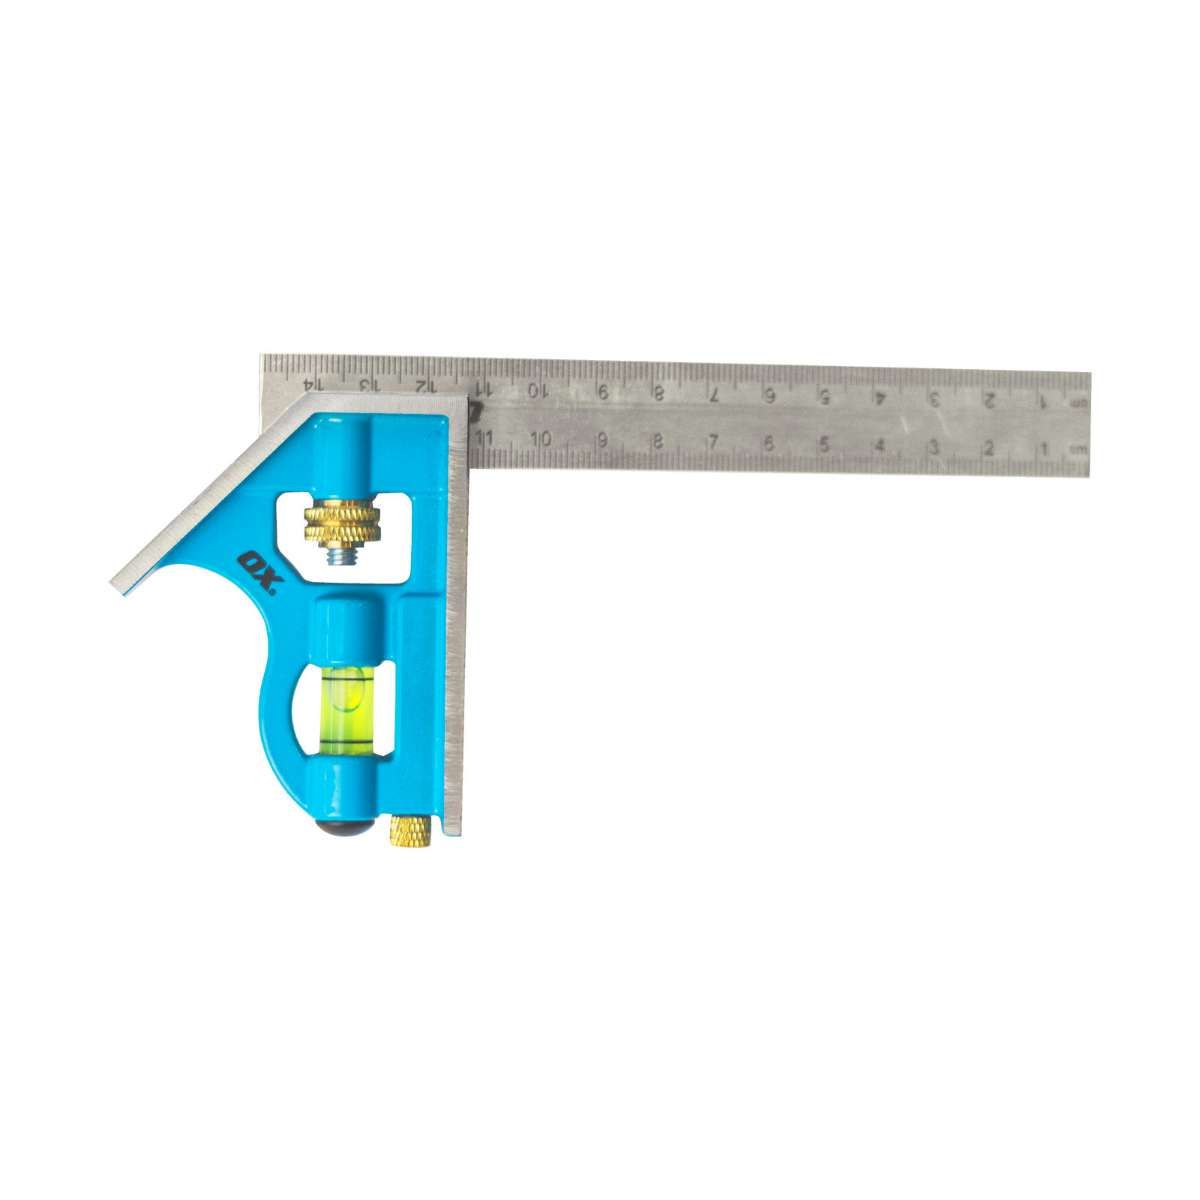 150mm Combination Square OX-P500515 by Ox